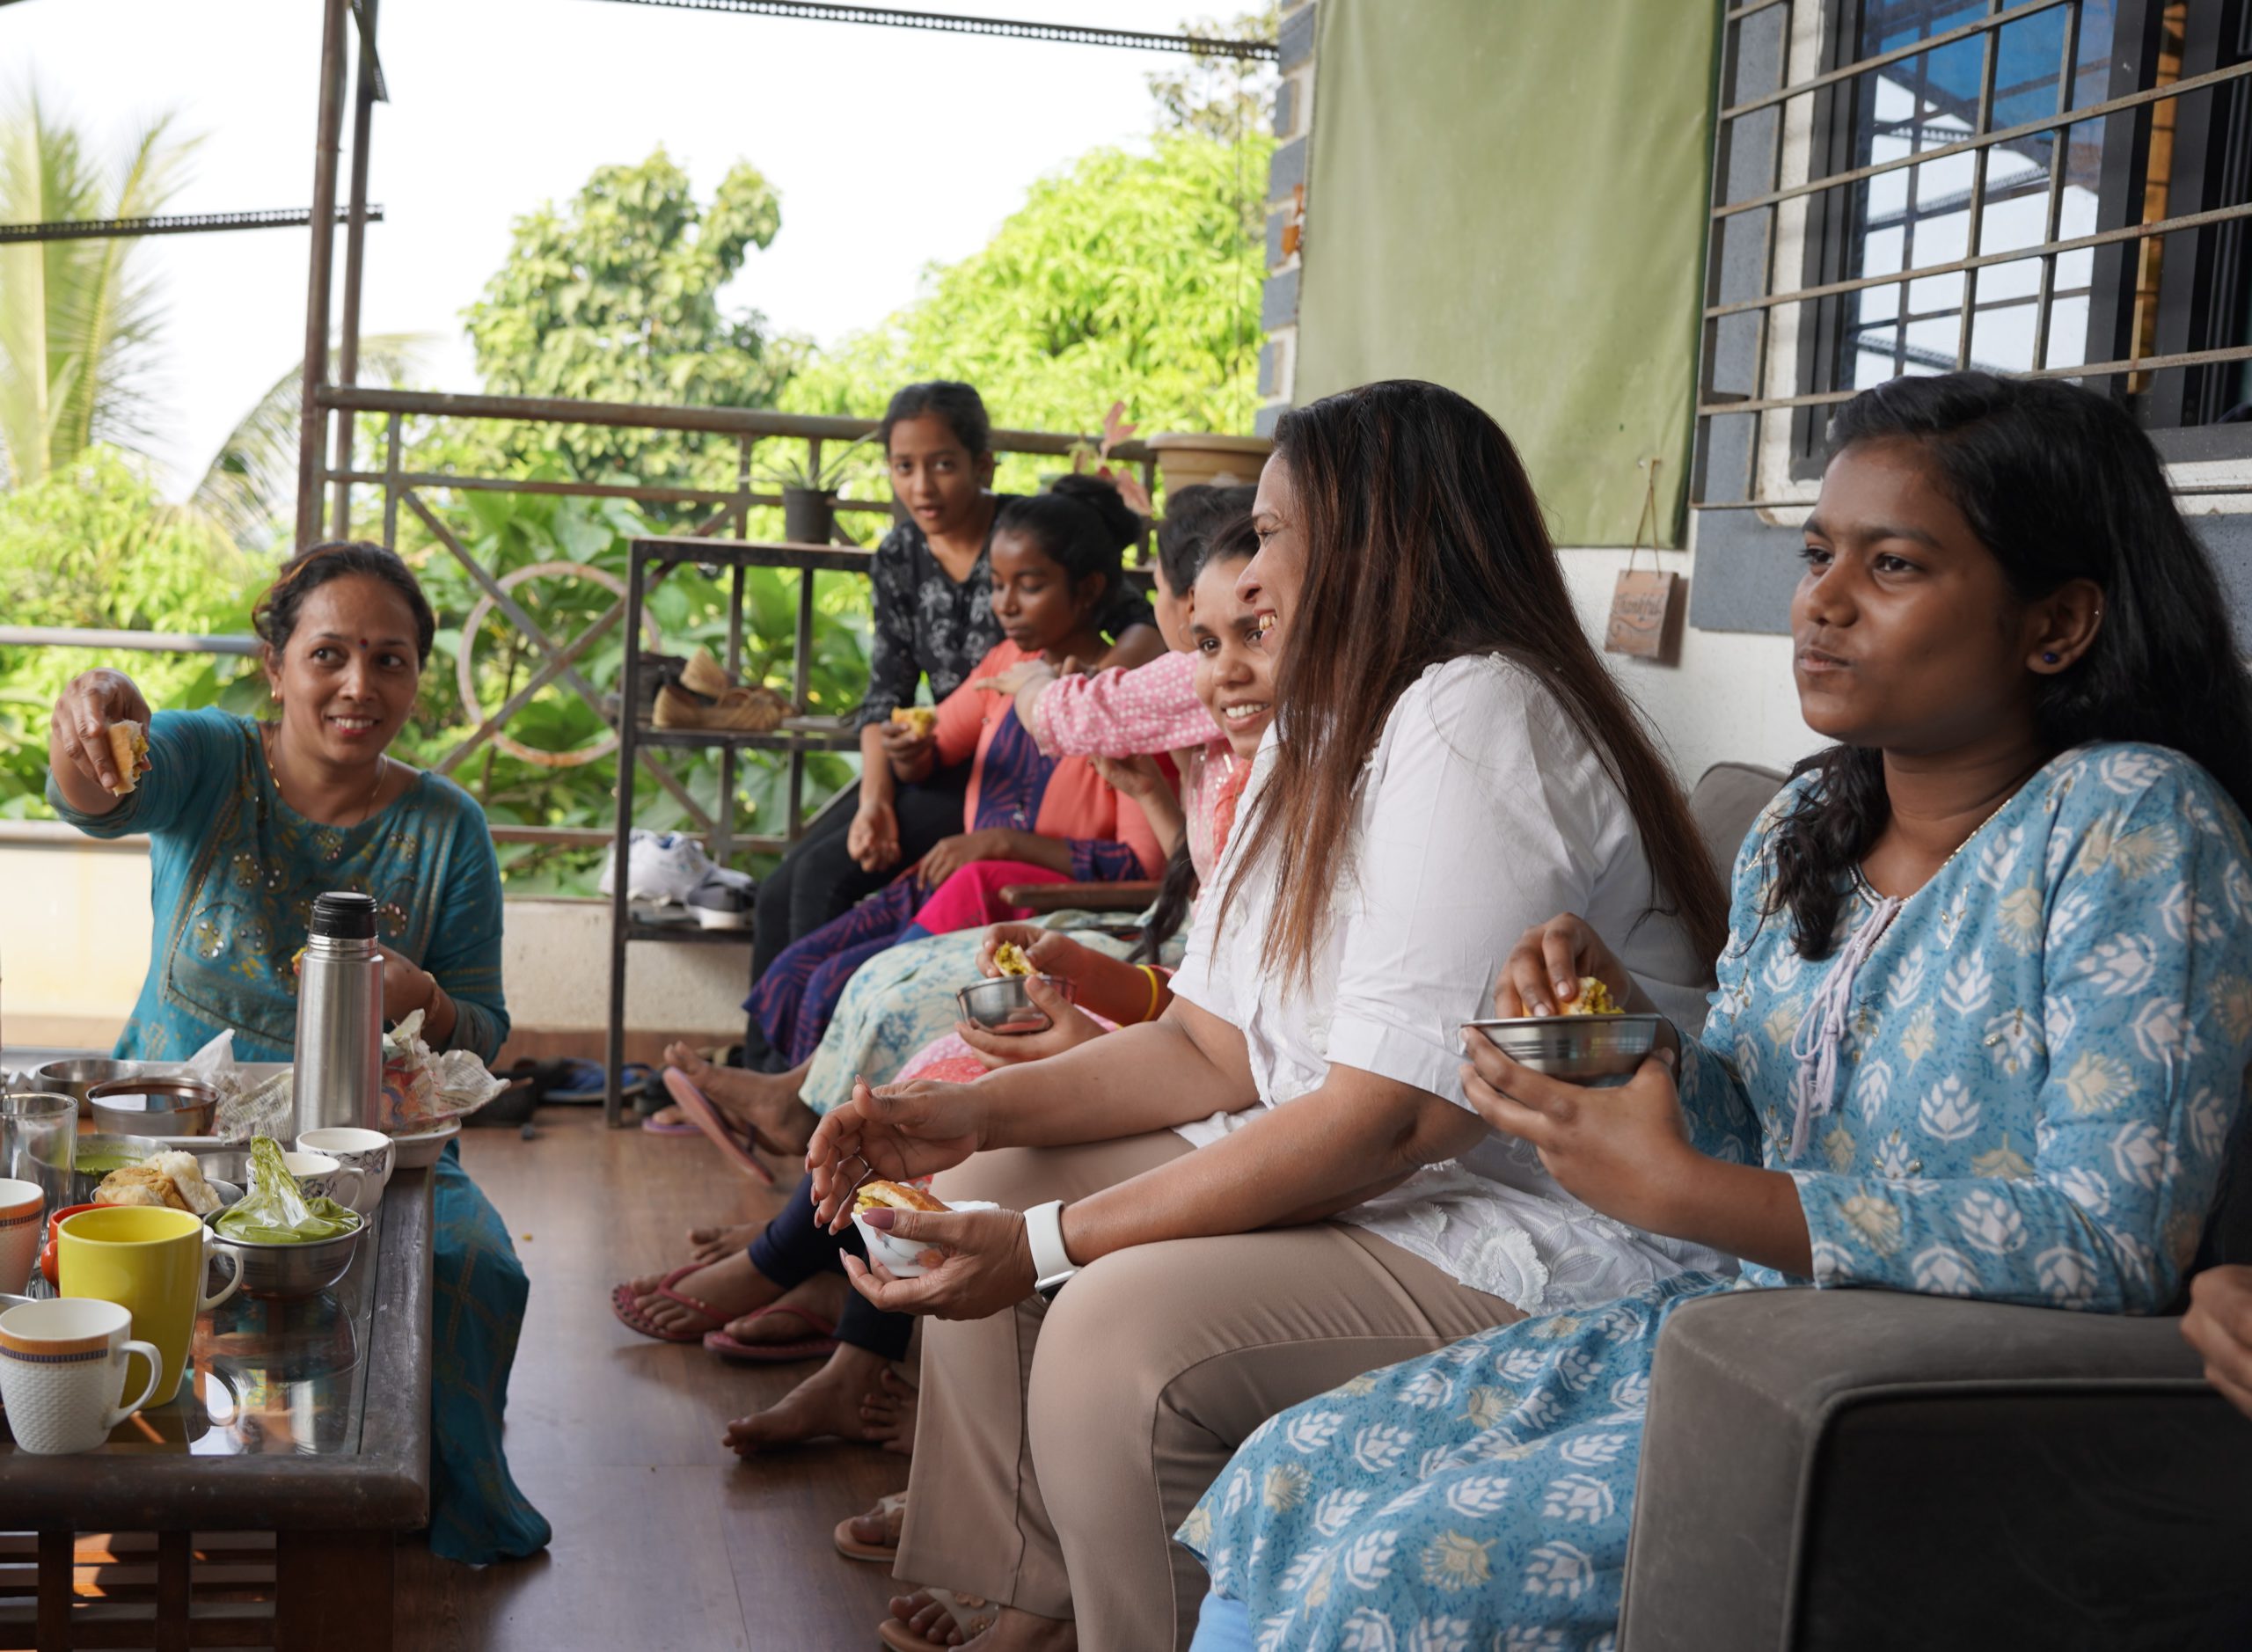 Chaiim Foundation: an anti trafficking NGO in India that empowers survivors